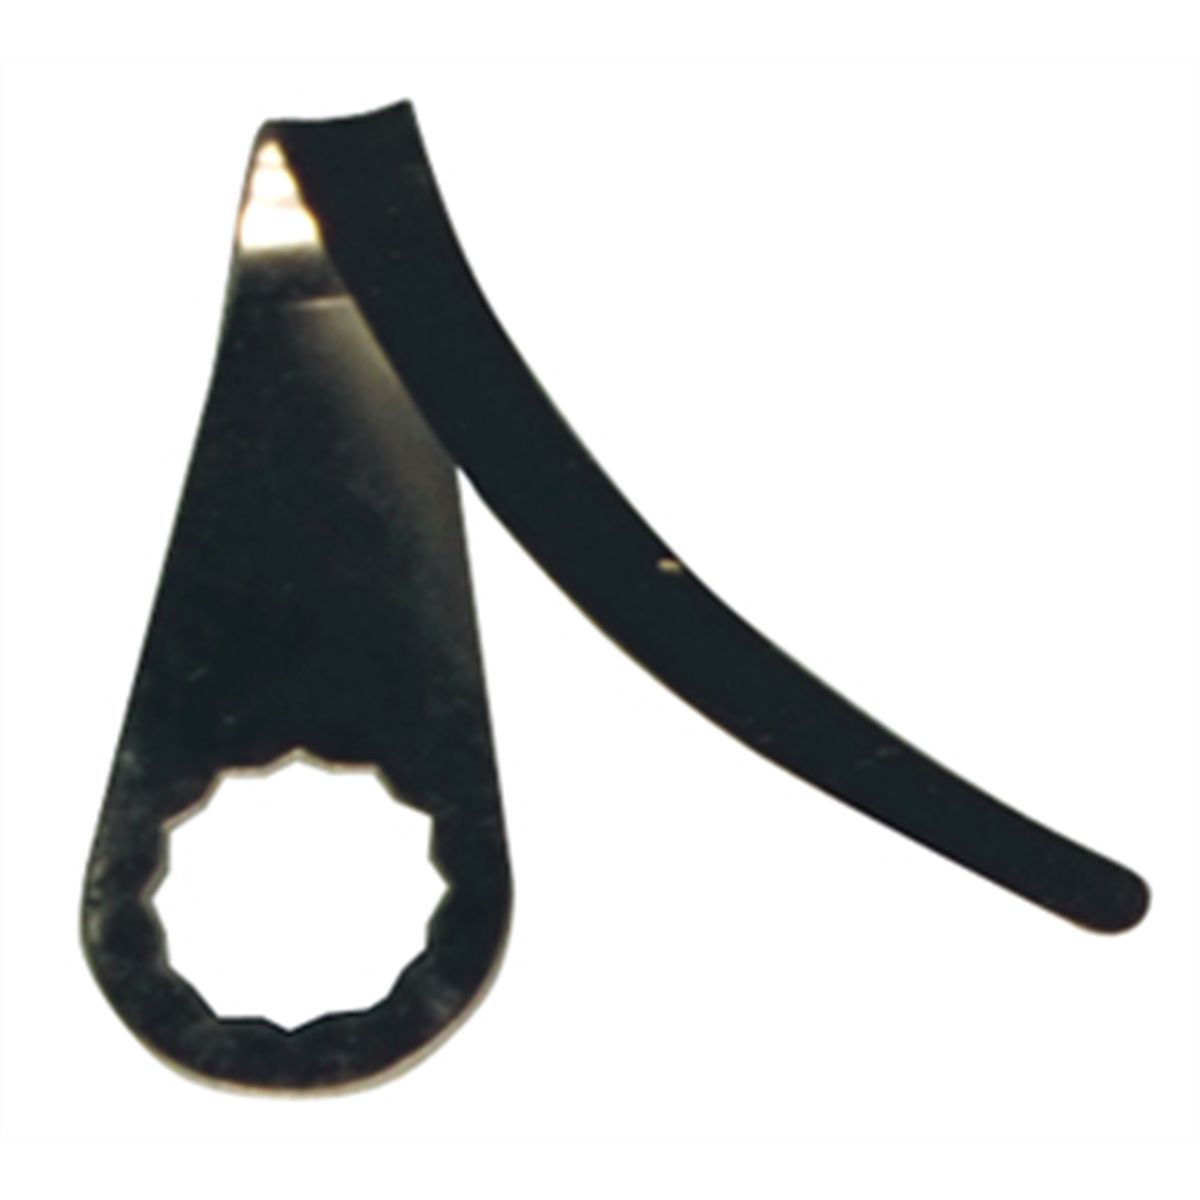 Windshield Knife Replacement Hook Blade for WINDK - 90mm